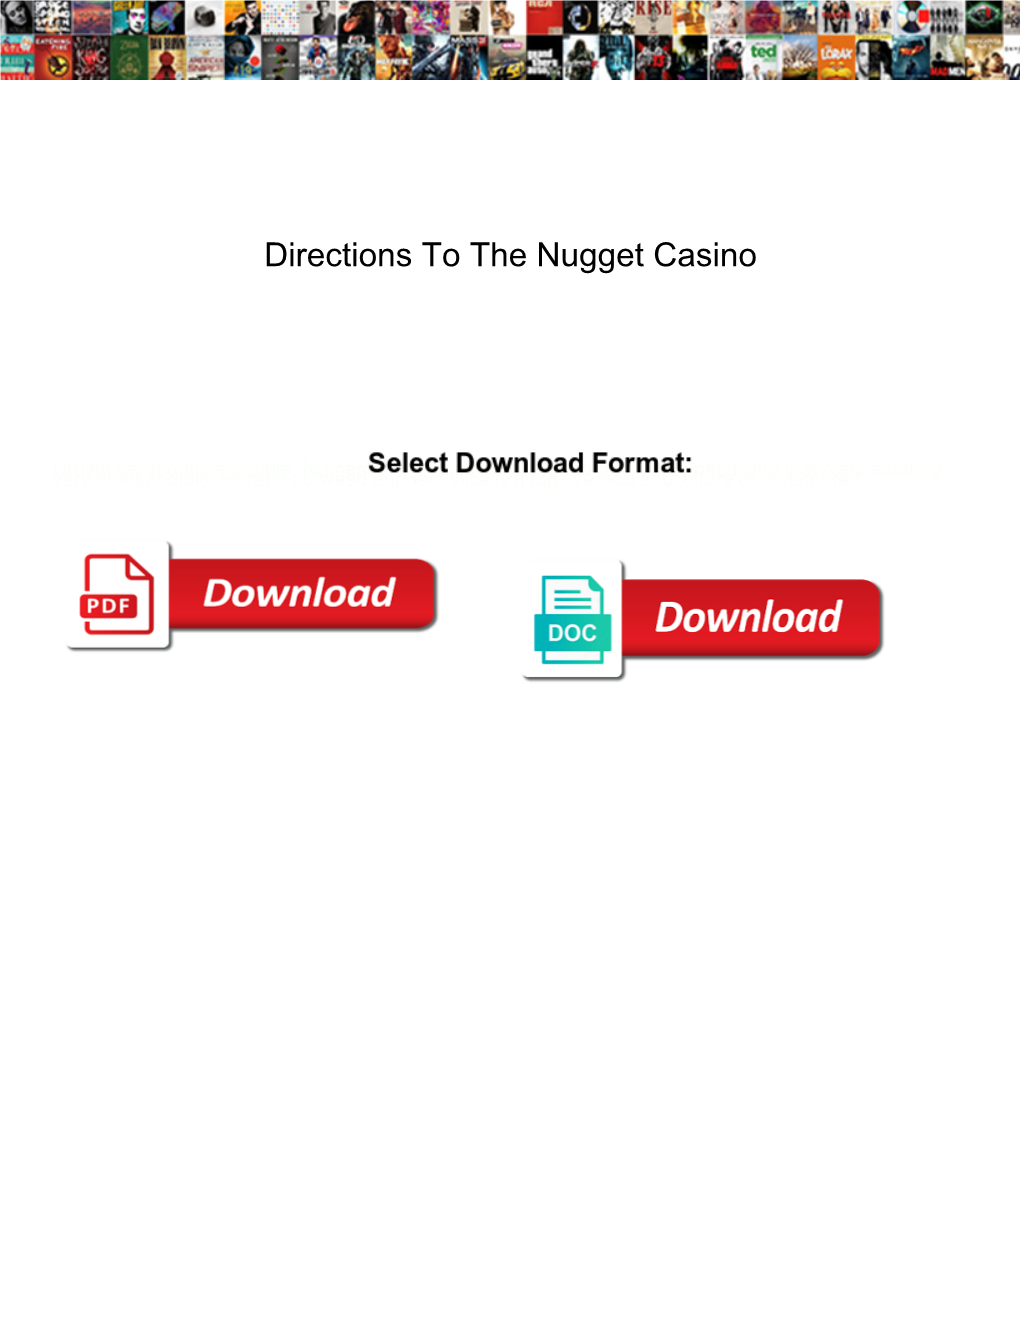 Directions to the Nugget Casino